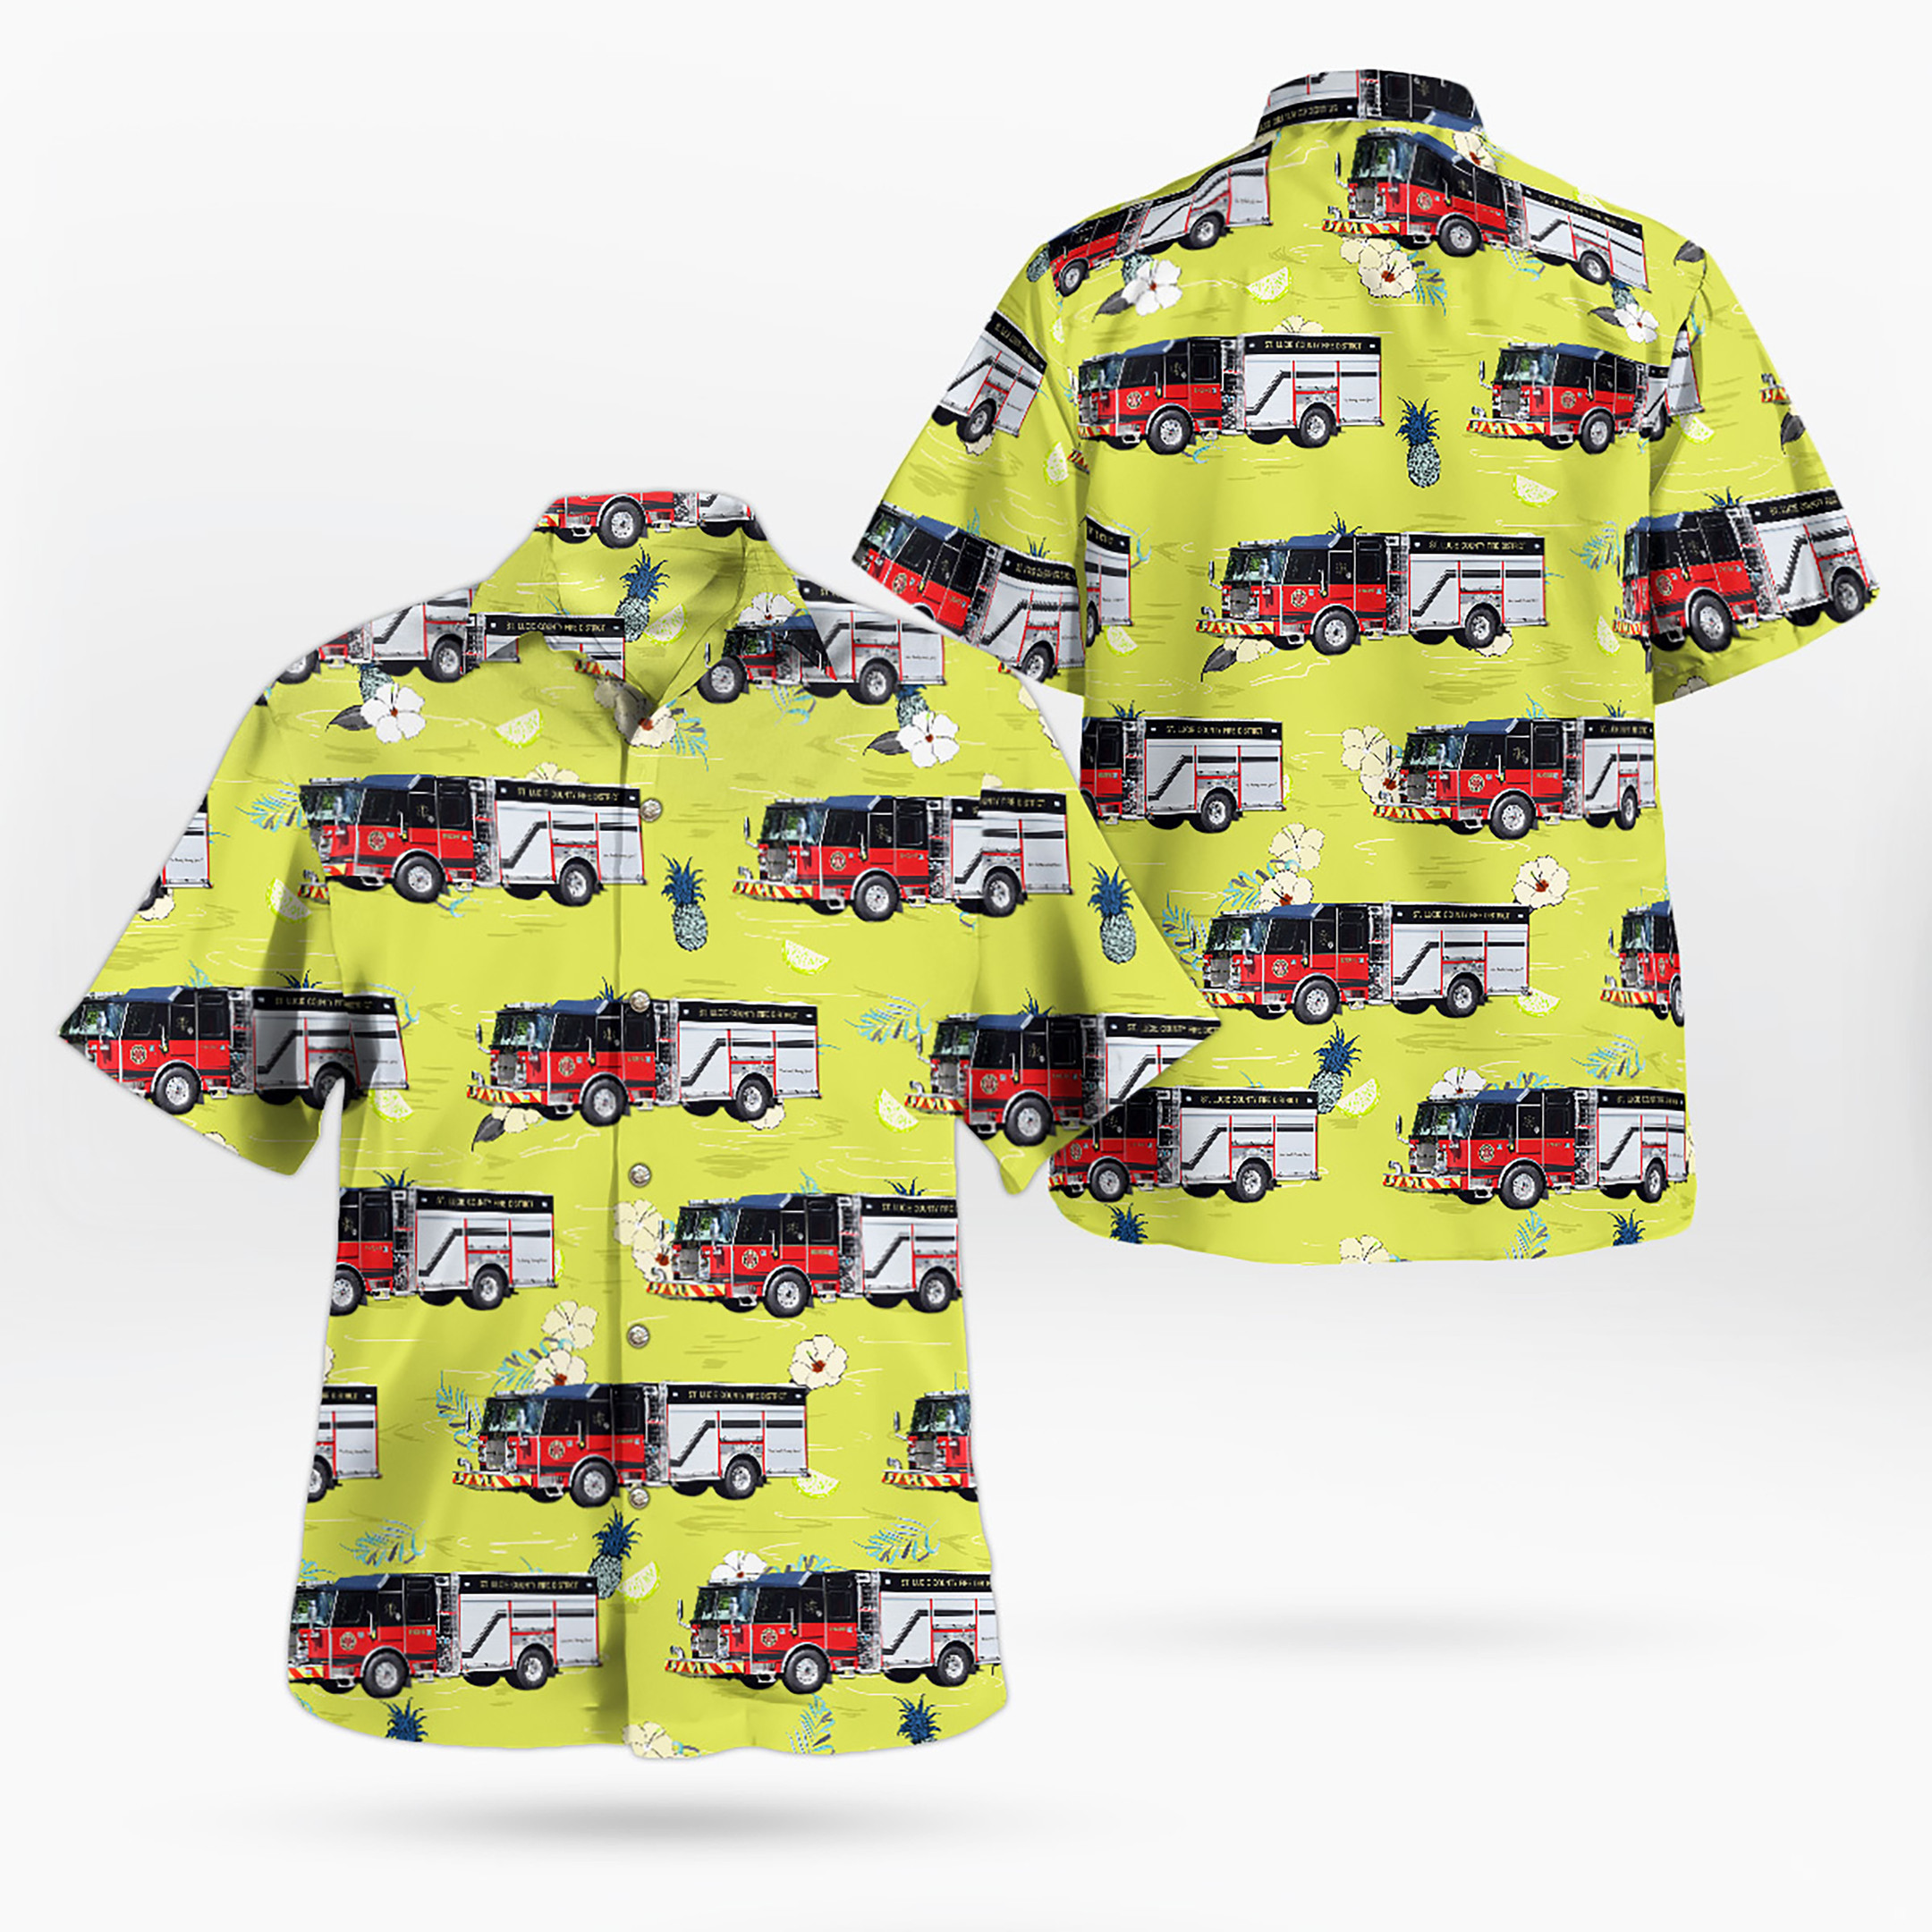 If you are in need of a new summertime look, pick up this Hawaiian shirt 202